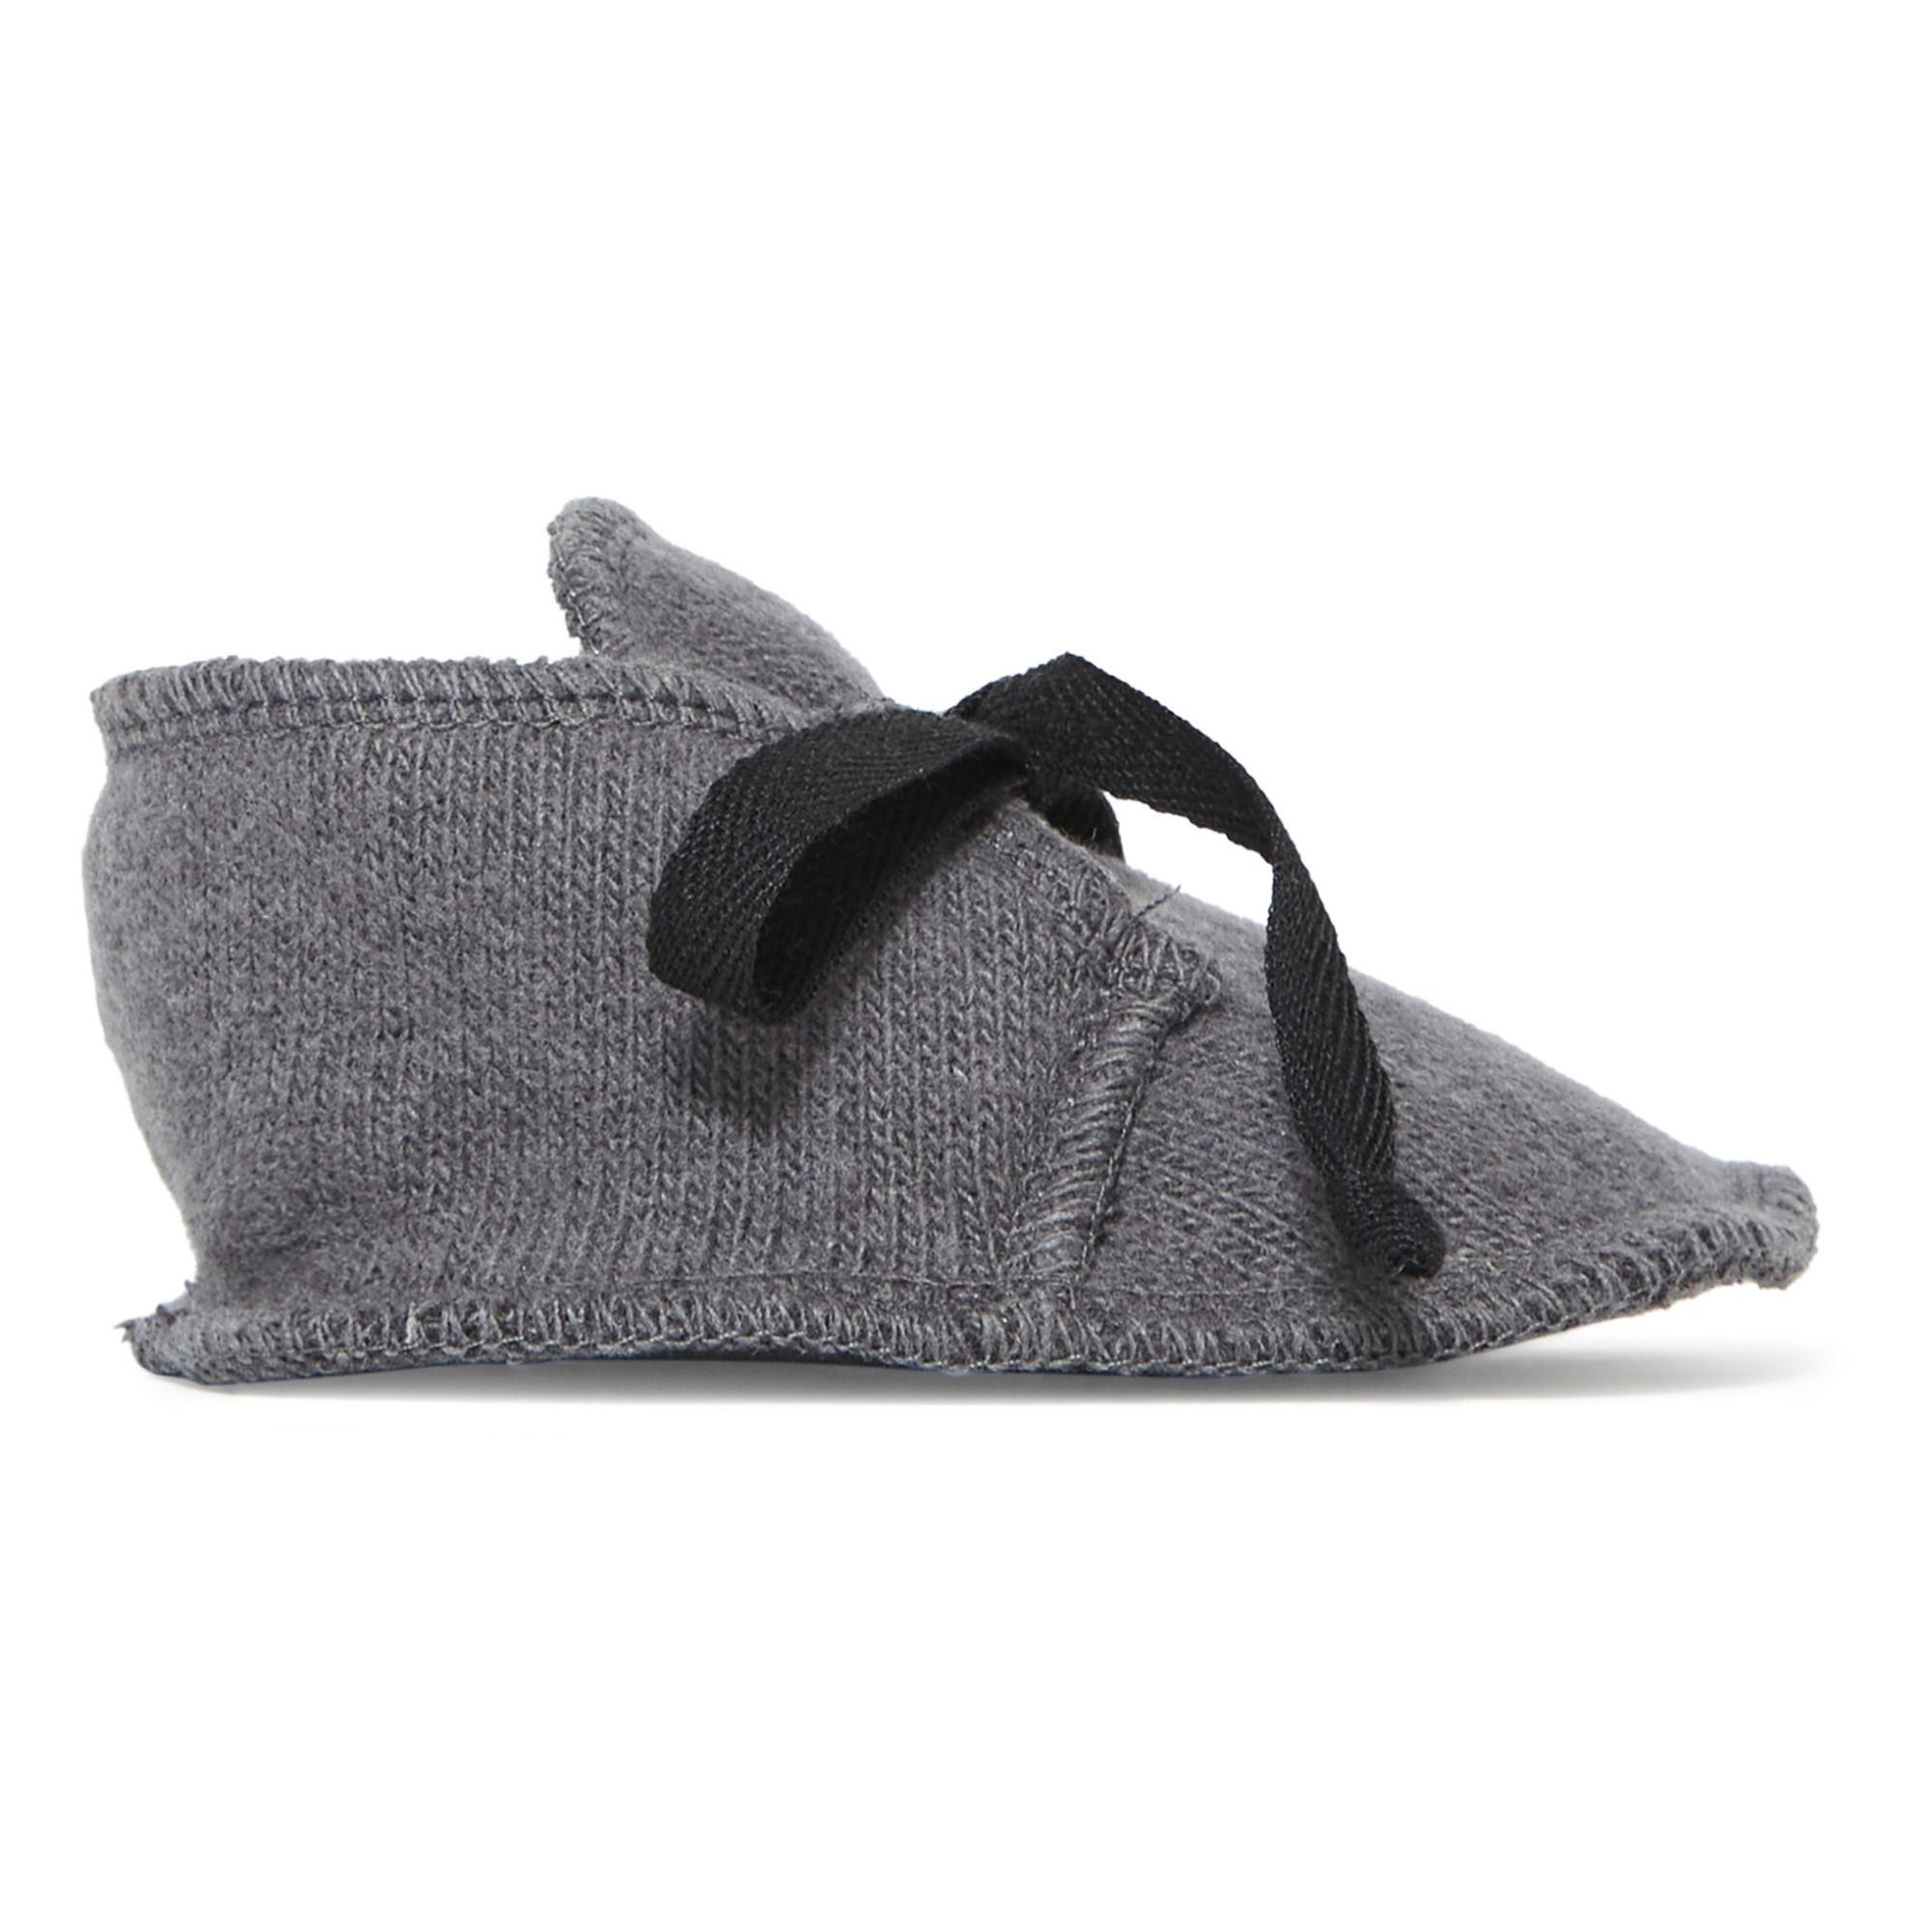 Babe & Tess - Chaussons Maille RecyclÃ©e - Fille - Gris anthracite